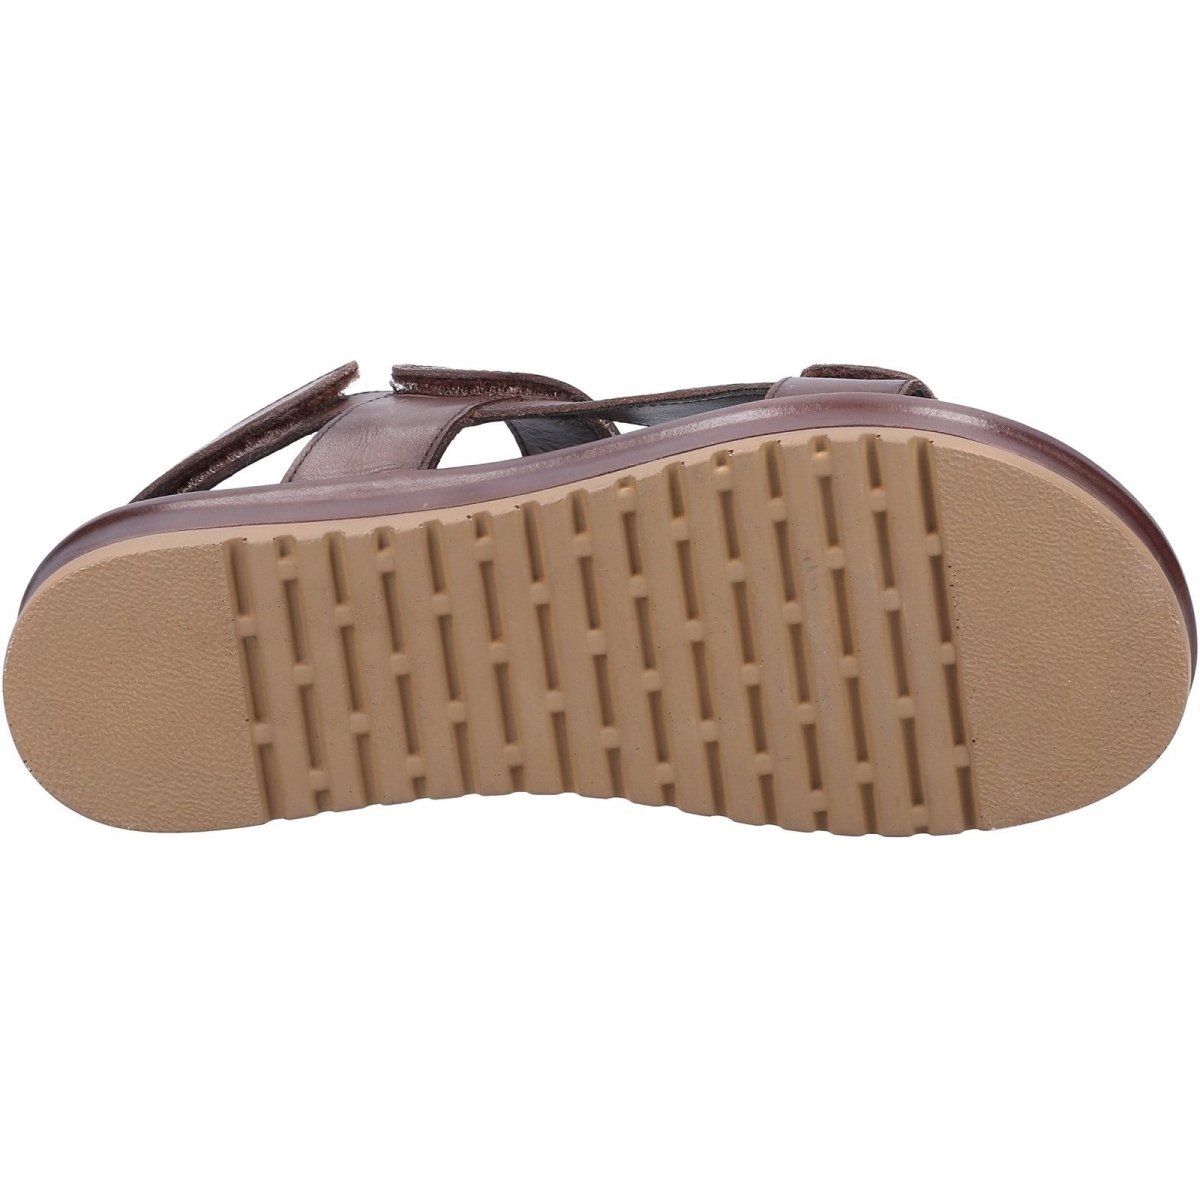 Cotswold Campden Ladies Touch-Fastening Summer Walking Sandals - Shoe Store Direct